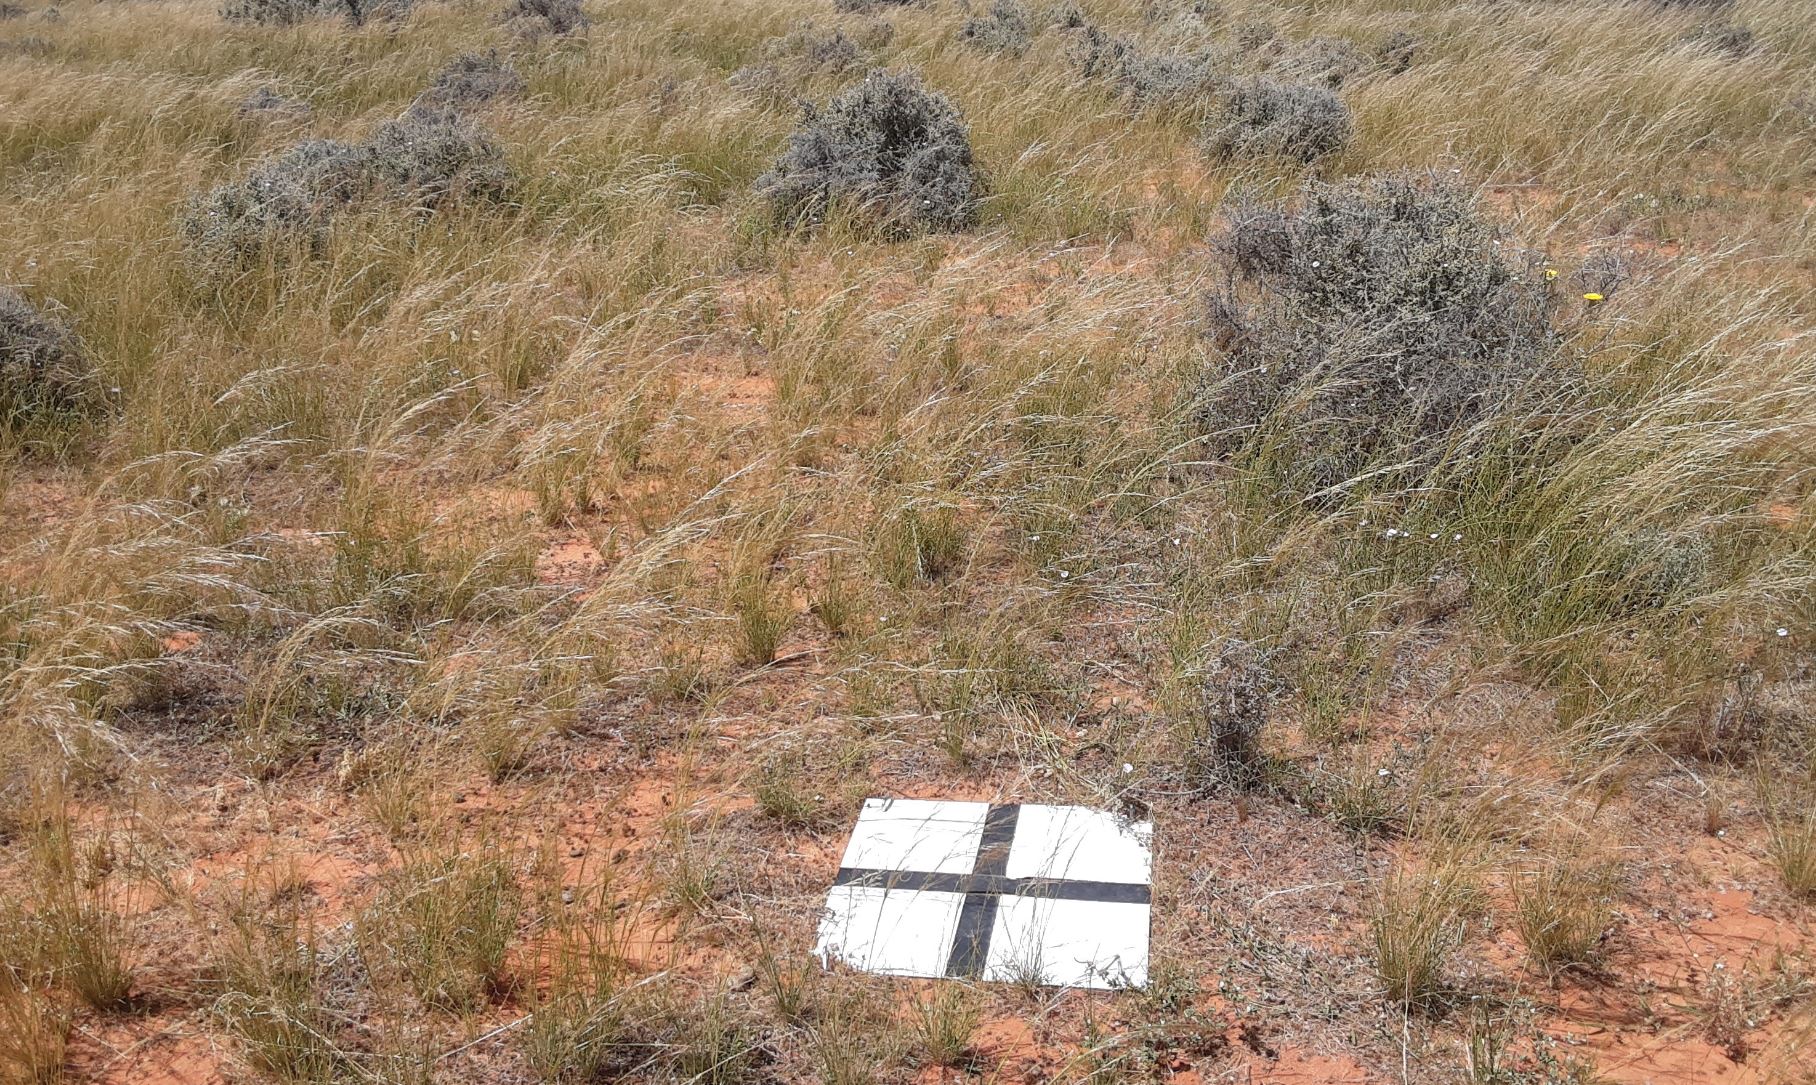 A paddock with patchy grass and a white corflute poster on the ground with a black cross to serve as a monitoring point. 